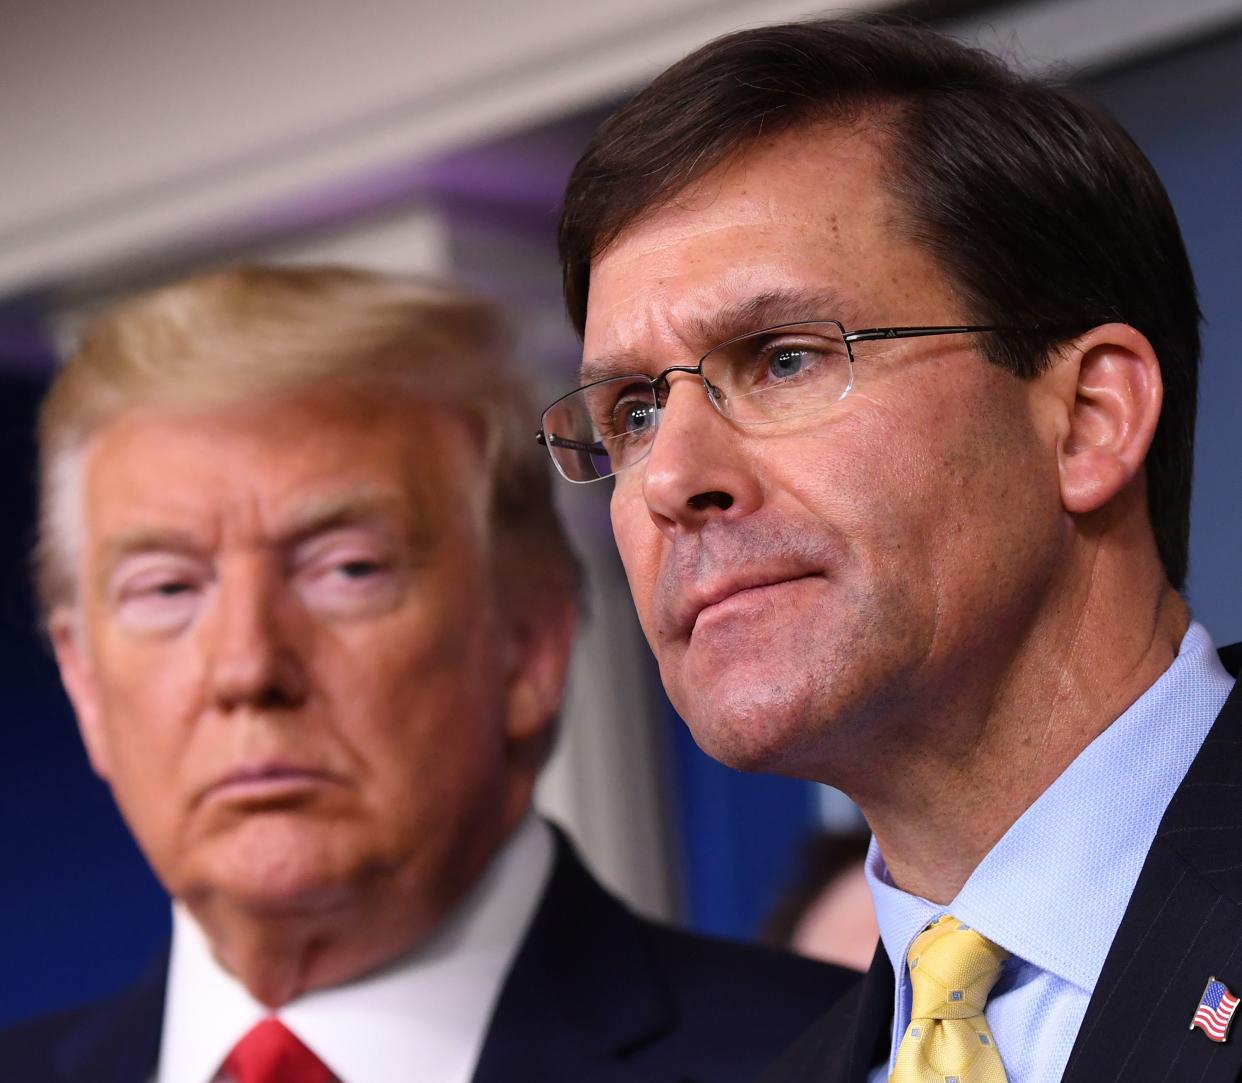 Then-Secretary of Defense Mark Esper (right) delivers remarks on the pandemic as then-President Donald Trump (left) looks on in the Brady Press Briefing Room at the White House in Washington, D.C. on March 18, 2020. 